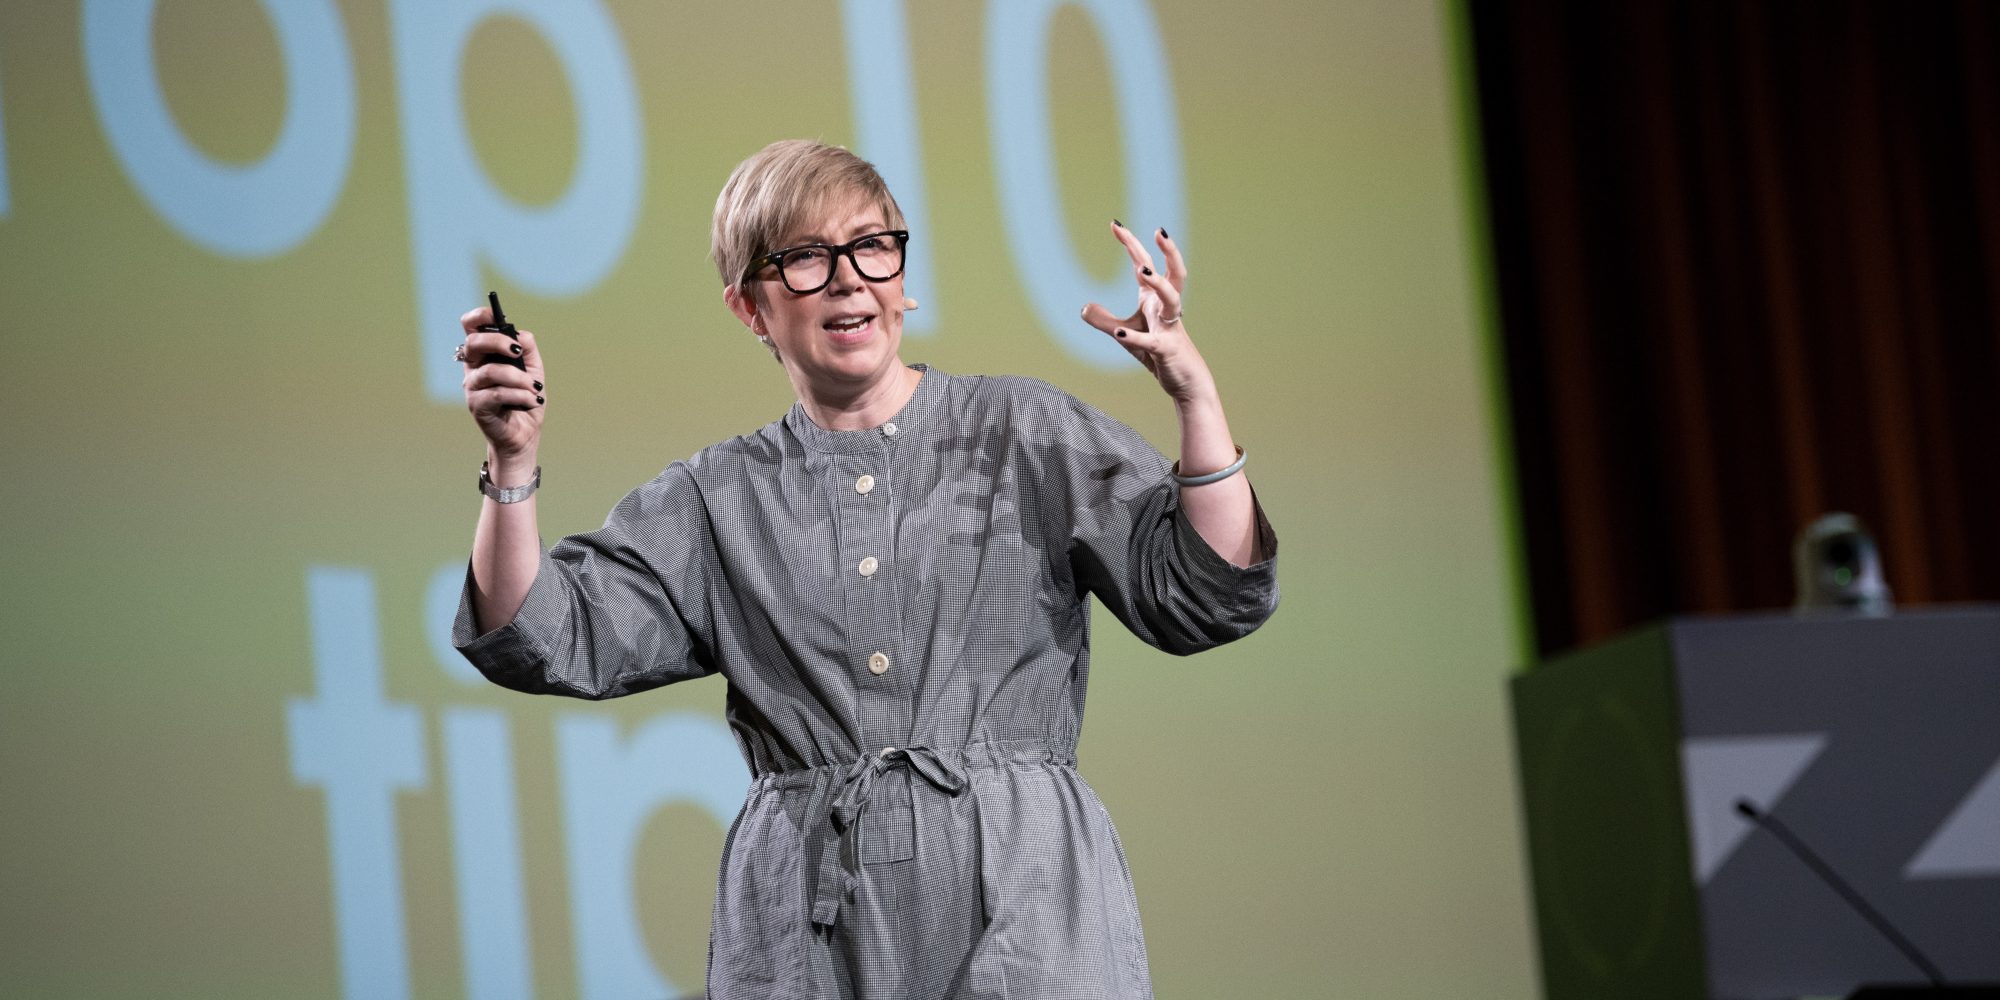 Katie speaking on stage at an international zero waste conference, wearing a grey shirt, jumpsuit, back glasses and hand expressions